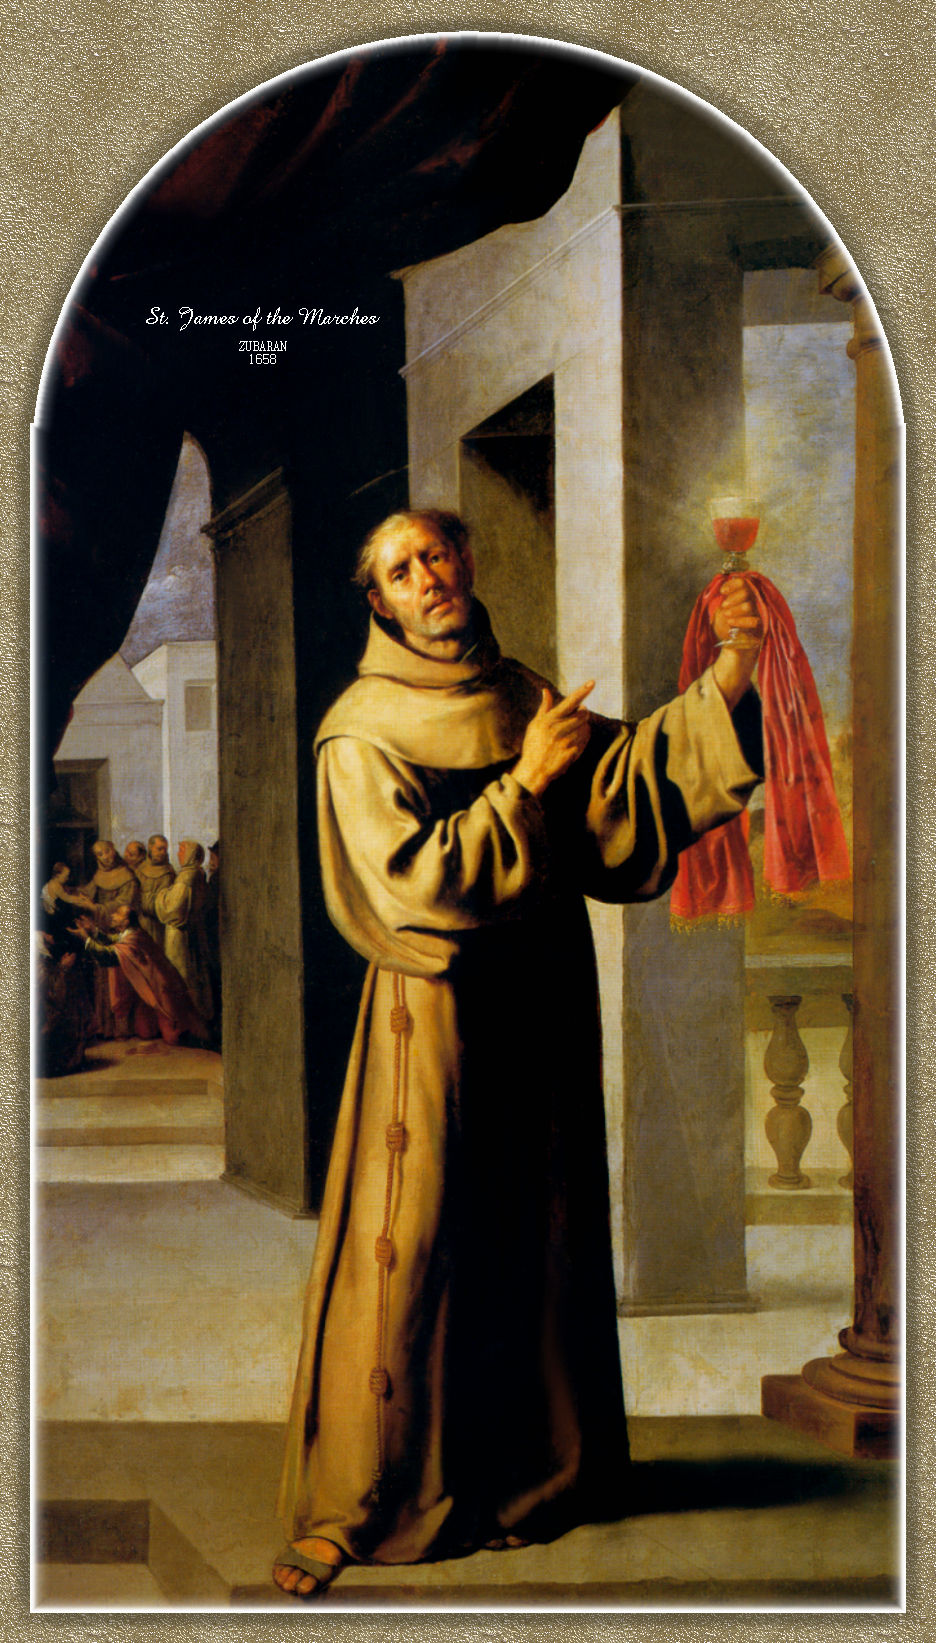 ST. JAMES OF THE MARCHES